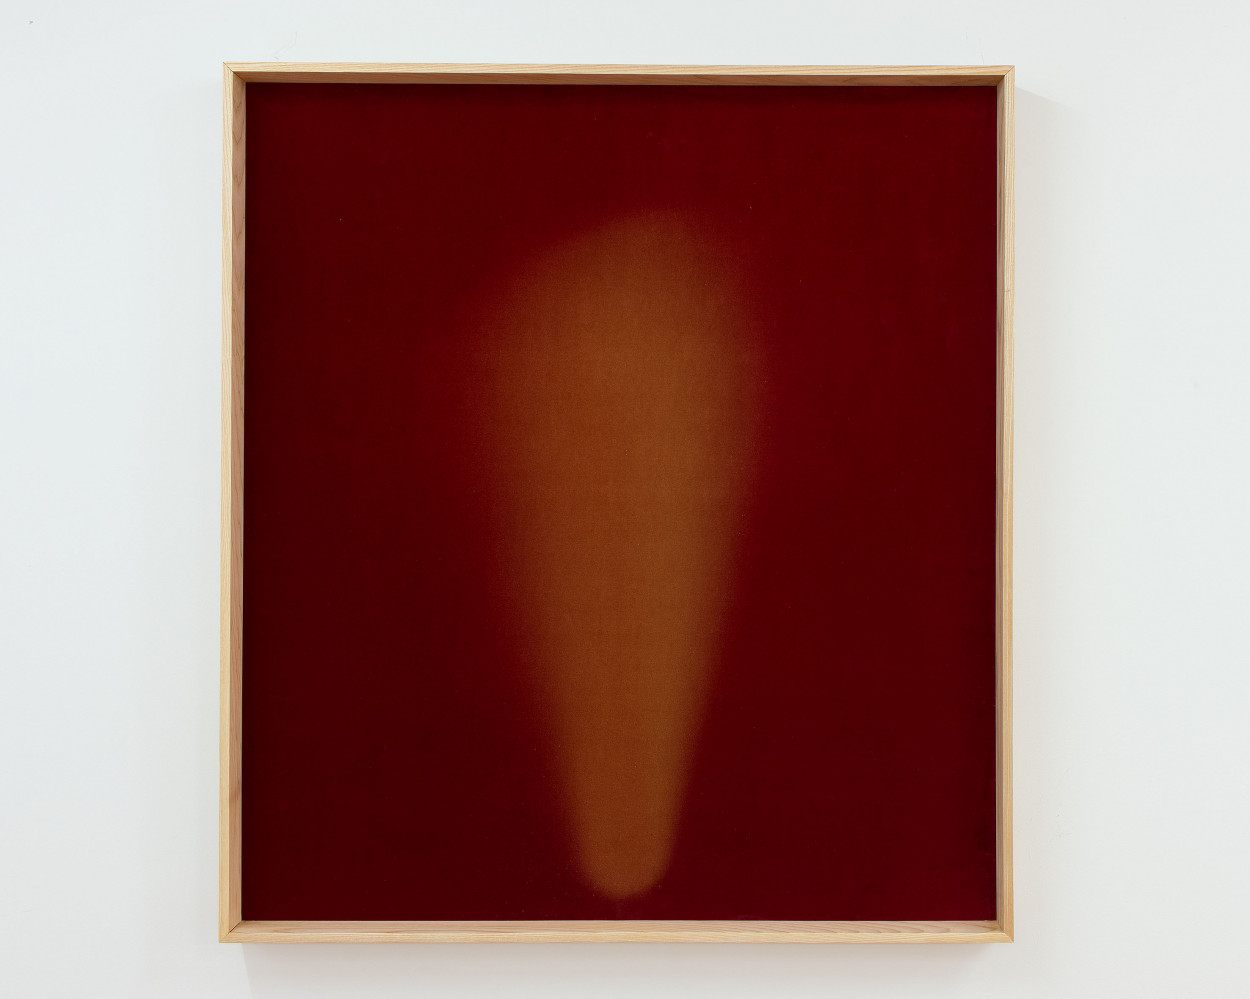 velvet on wooden board, wooden frame 100 x 90 x 7 cm; courtesy the artist and Pola Magnetyczne Gallery, Warsaw